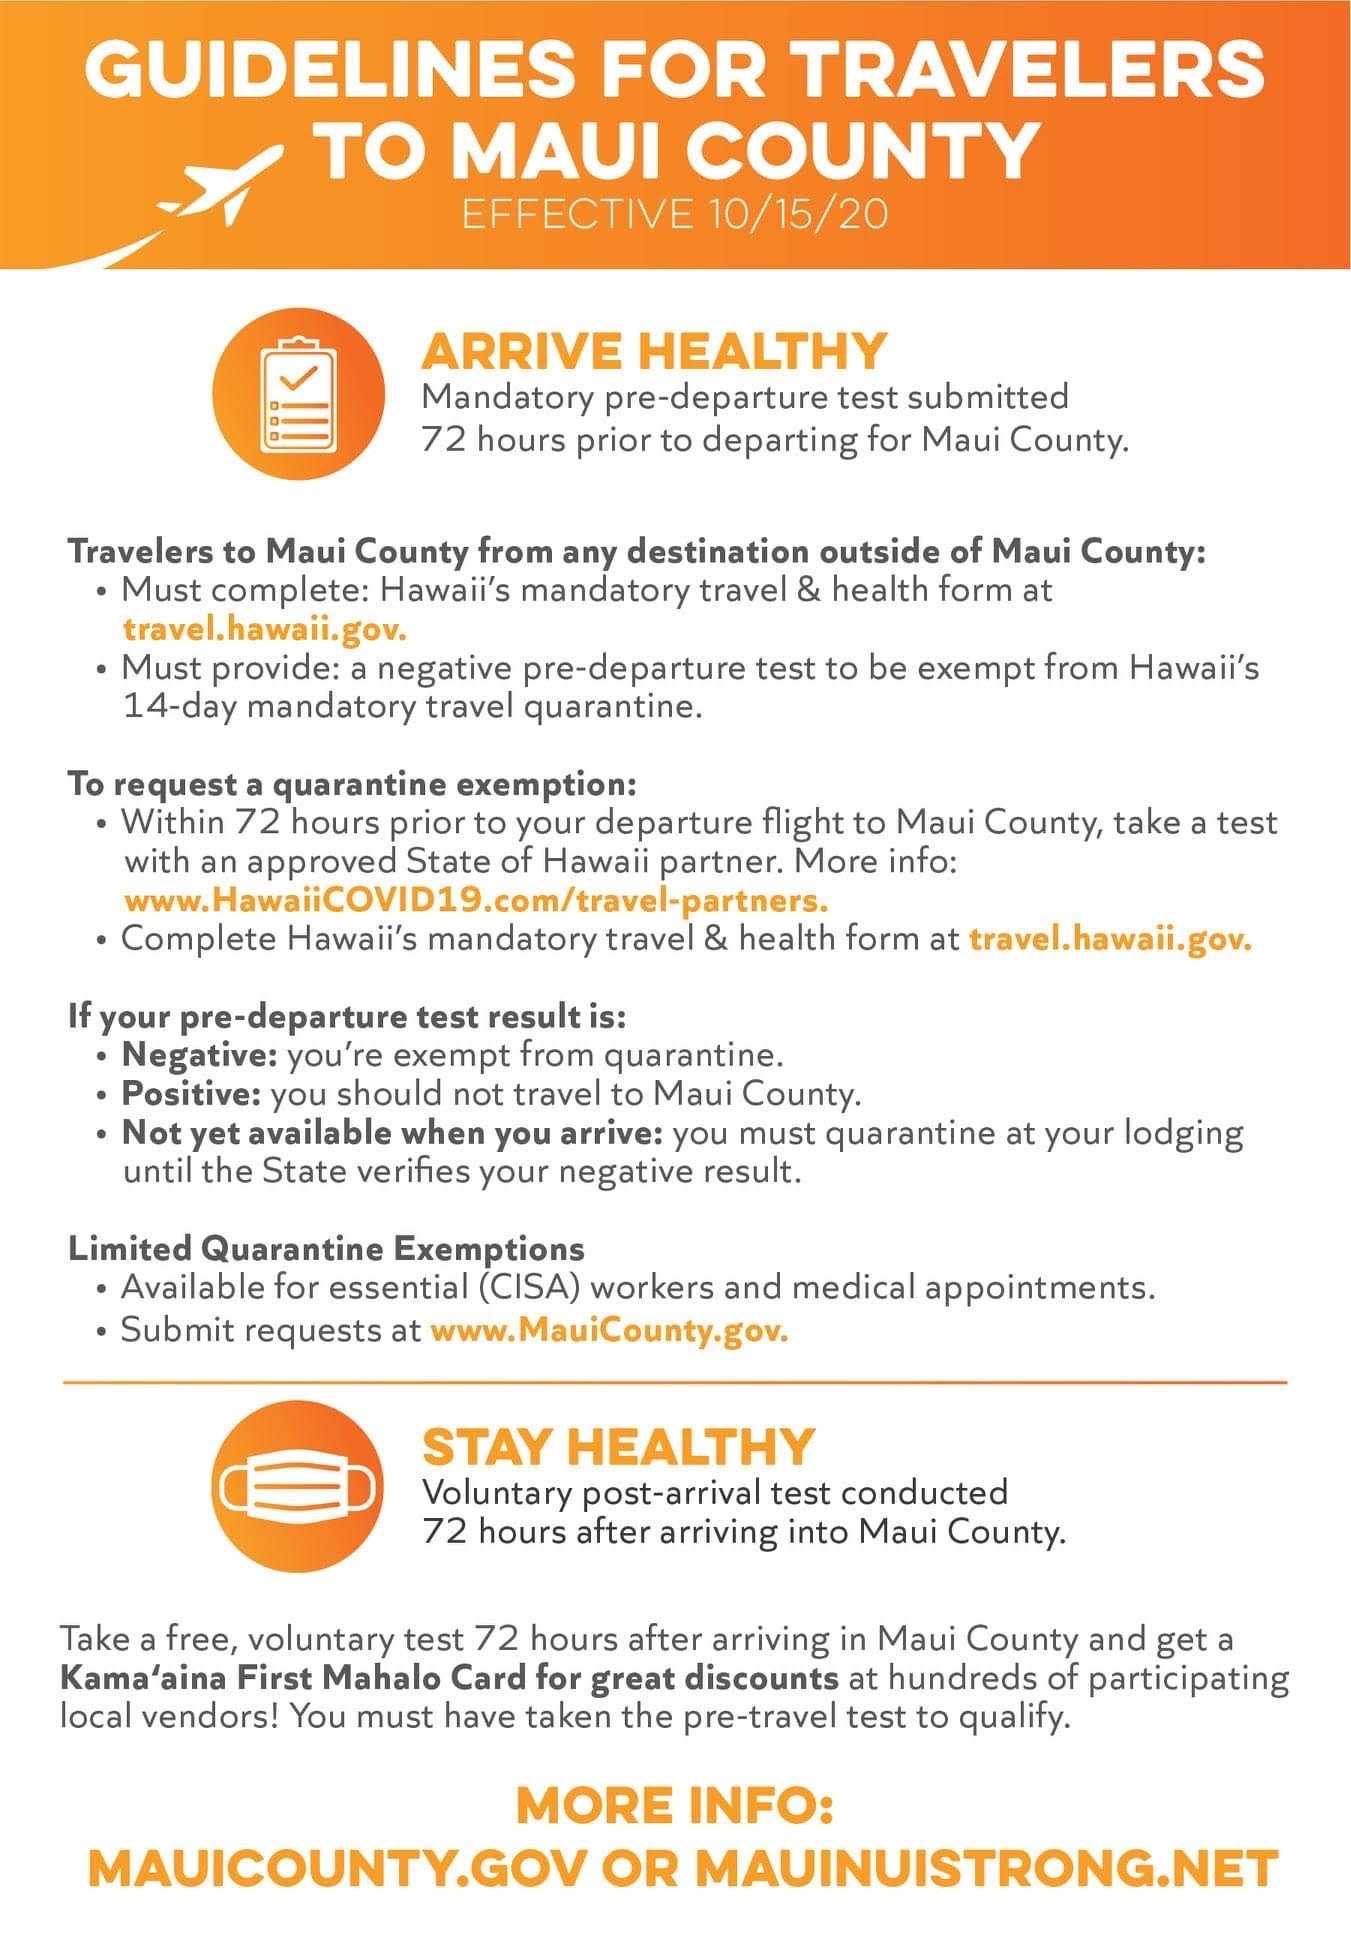 Guidelines for Traveling to Maui